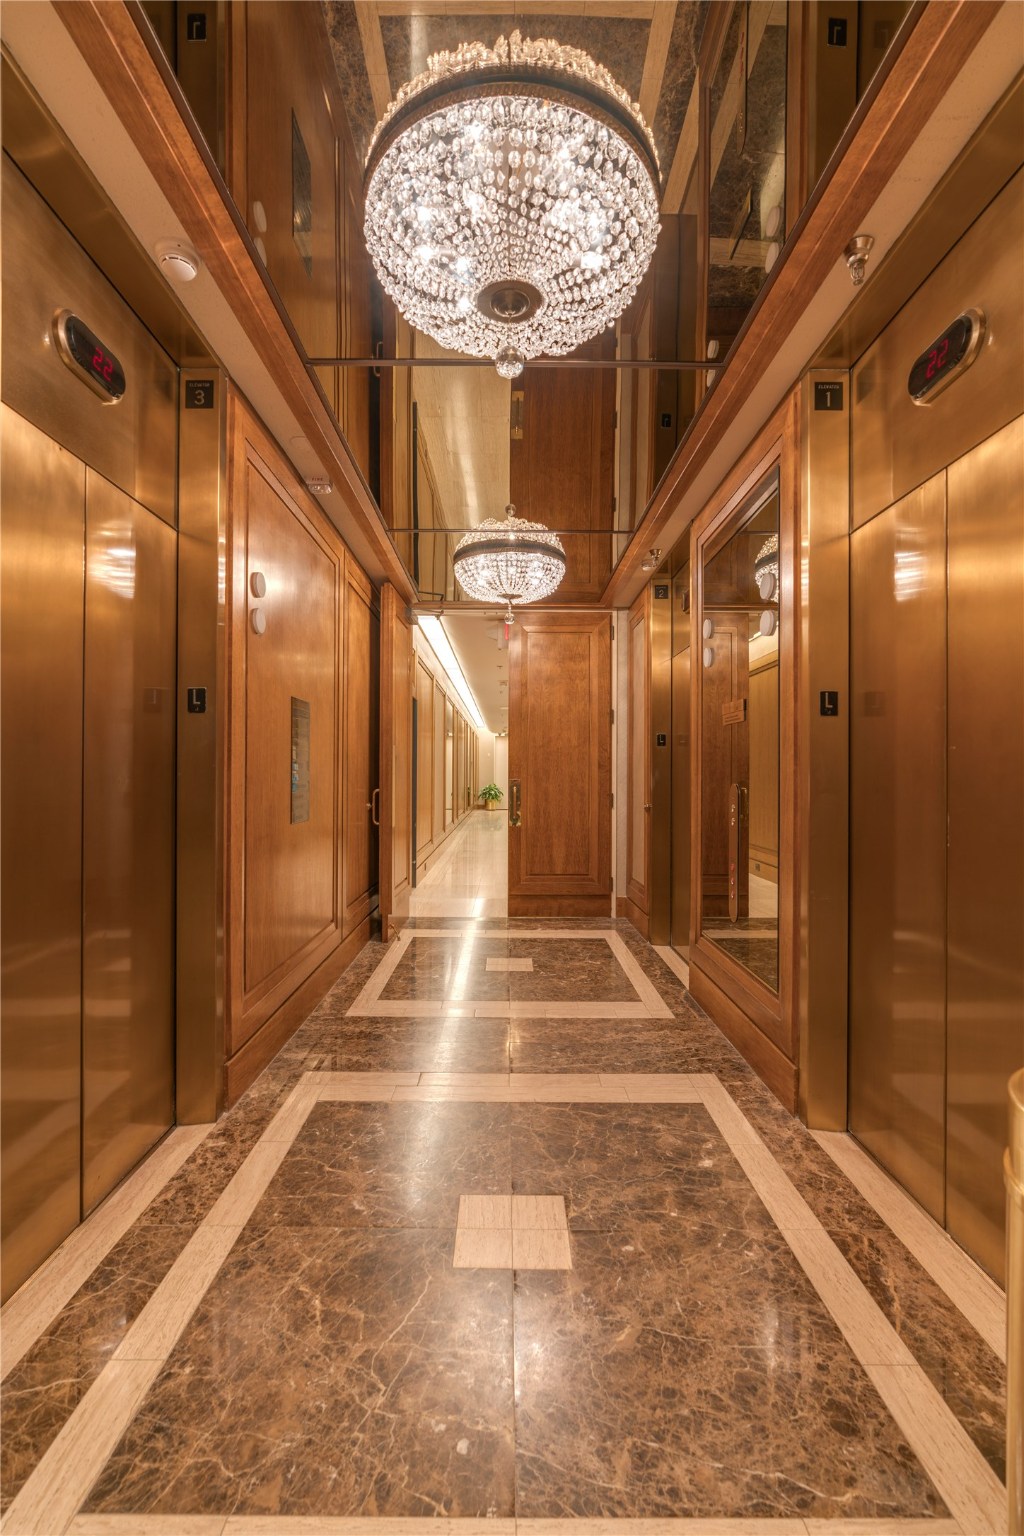 Elegant elevator lobby with wood paneling, crystal chandeliers and marble floors. Three elevators assure you will be whisked to your suite quickly.